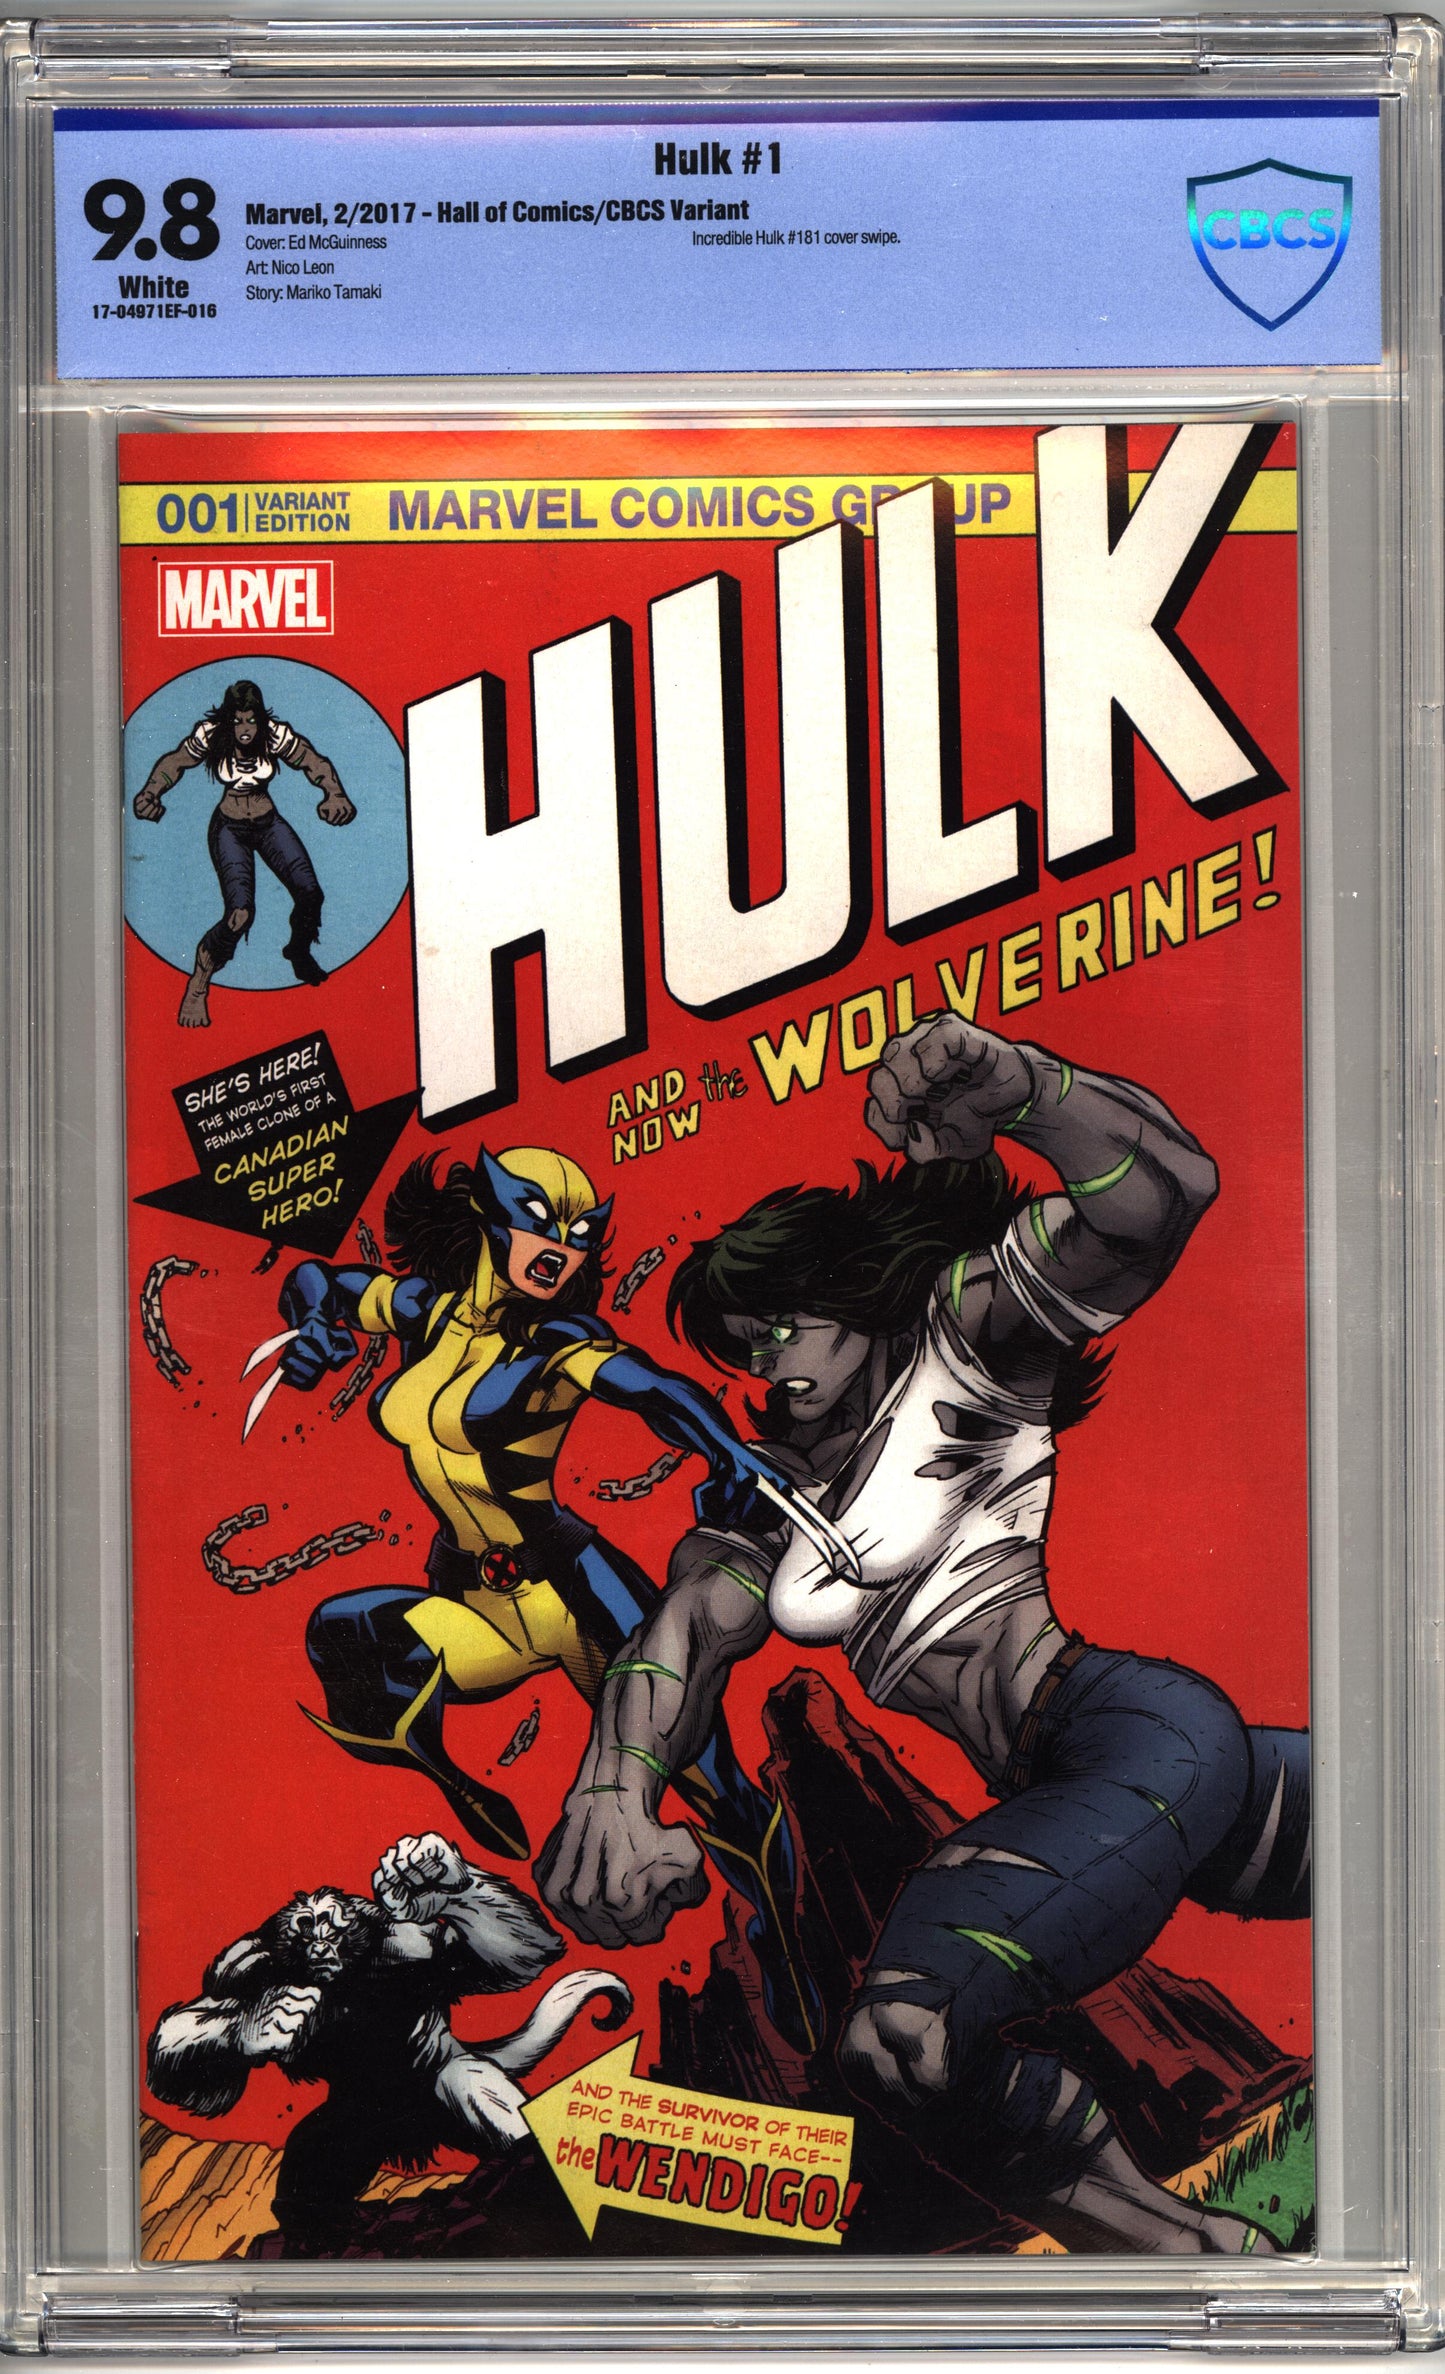 Hulk #1 (2017) Ed McGuiness Exclusive (Cover A) Full Color - Hulk 181 Homage Variant- CBCS 9.8